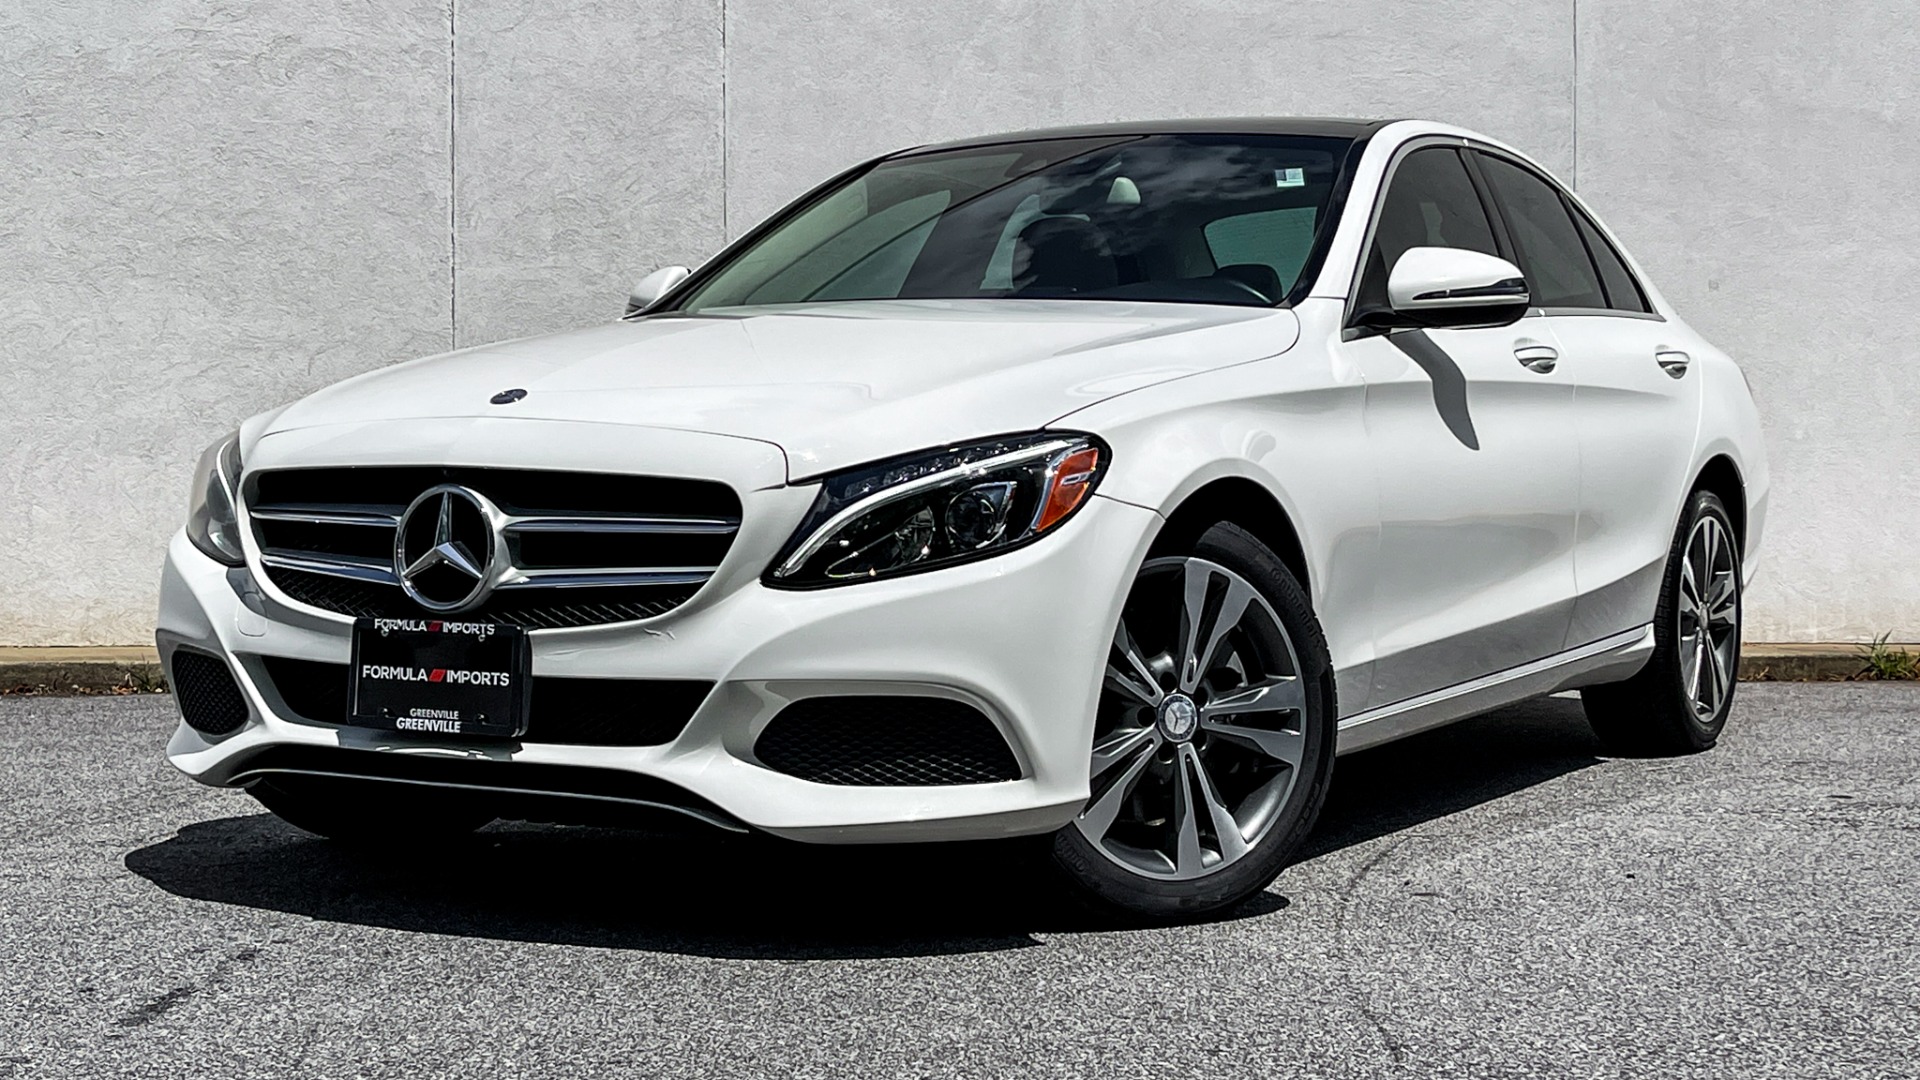 Used 2016 Mercedes-Benz C-Class C300 / 4MATIC / PREMIUM / LINDEN WOOD / ILLUMINATED STAR / MULTIMEDIA for sale $25,995 at Formula Imports in Charlotte NC 28227 1